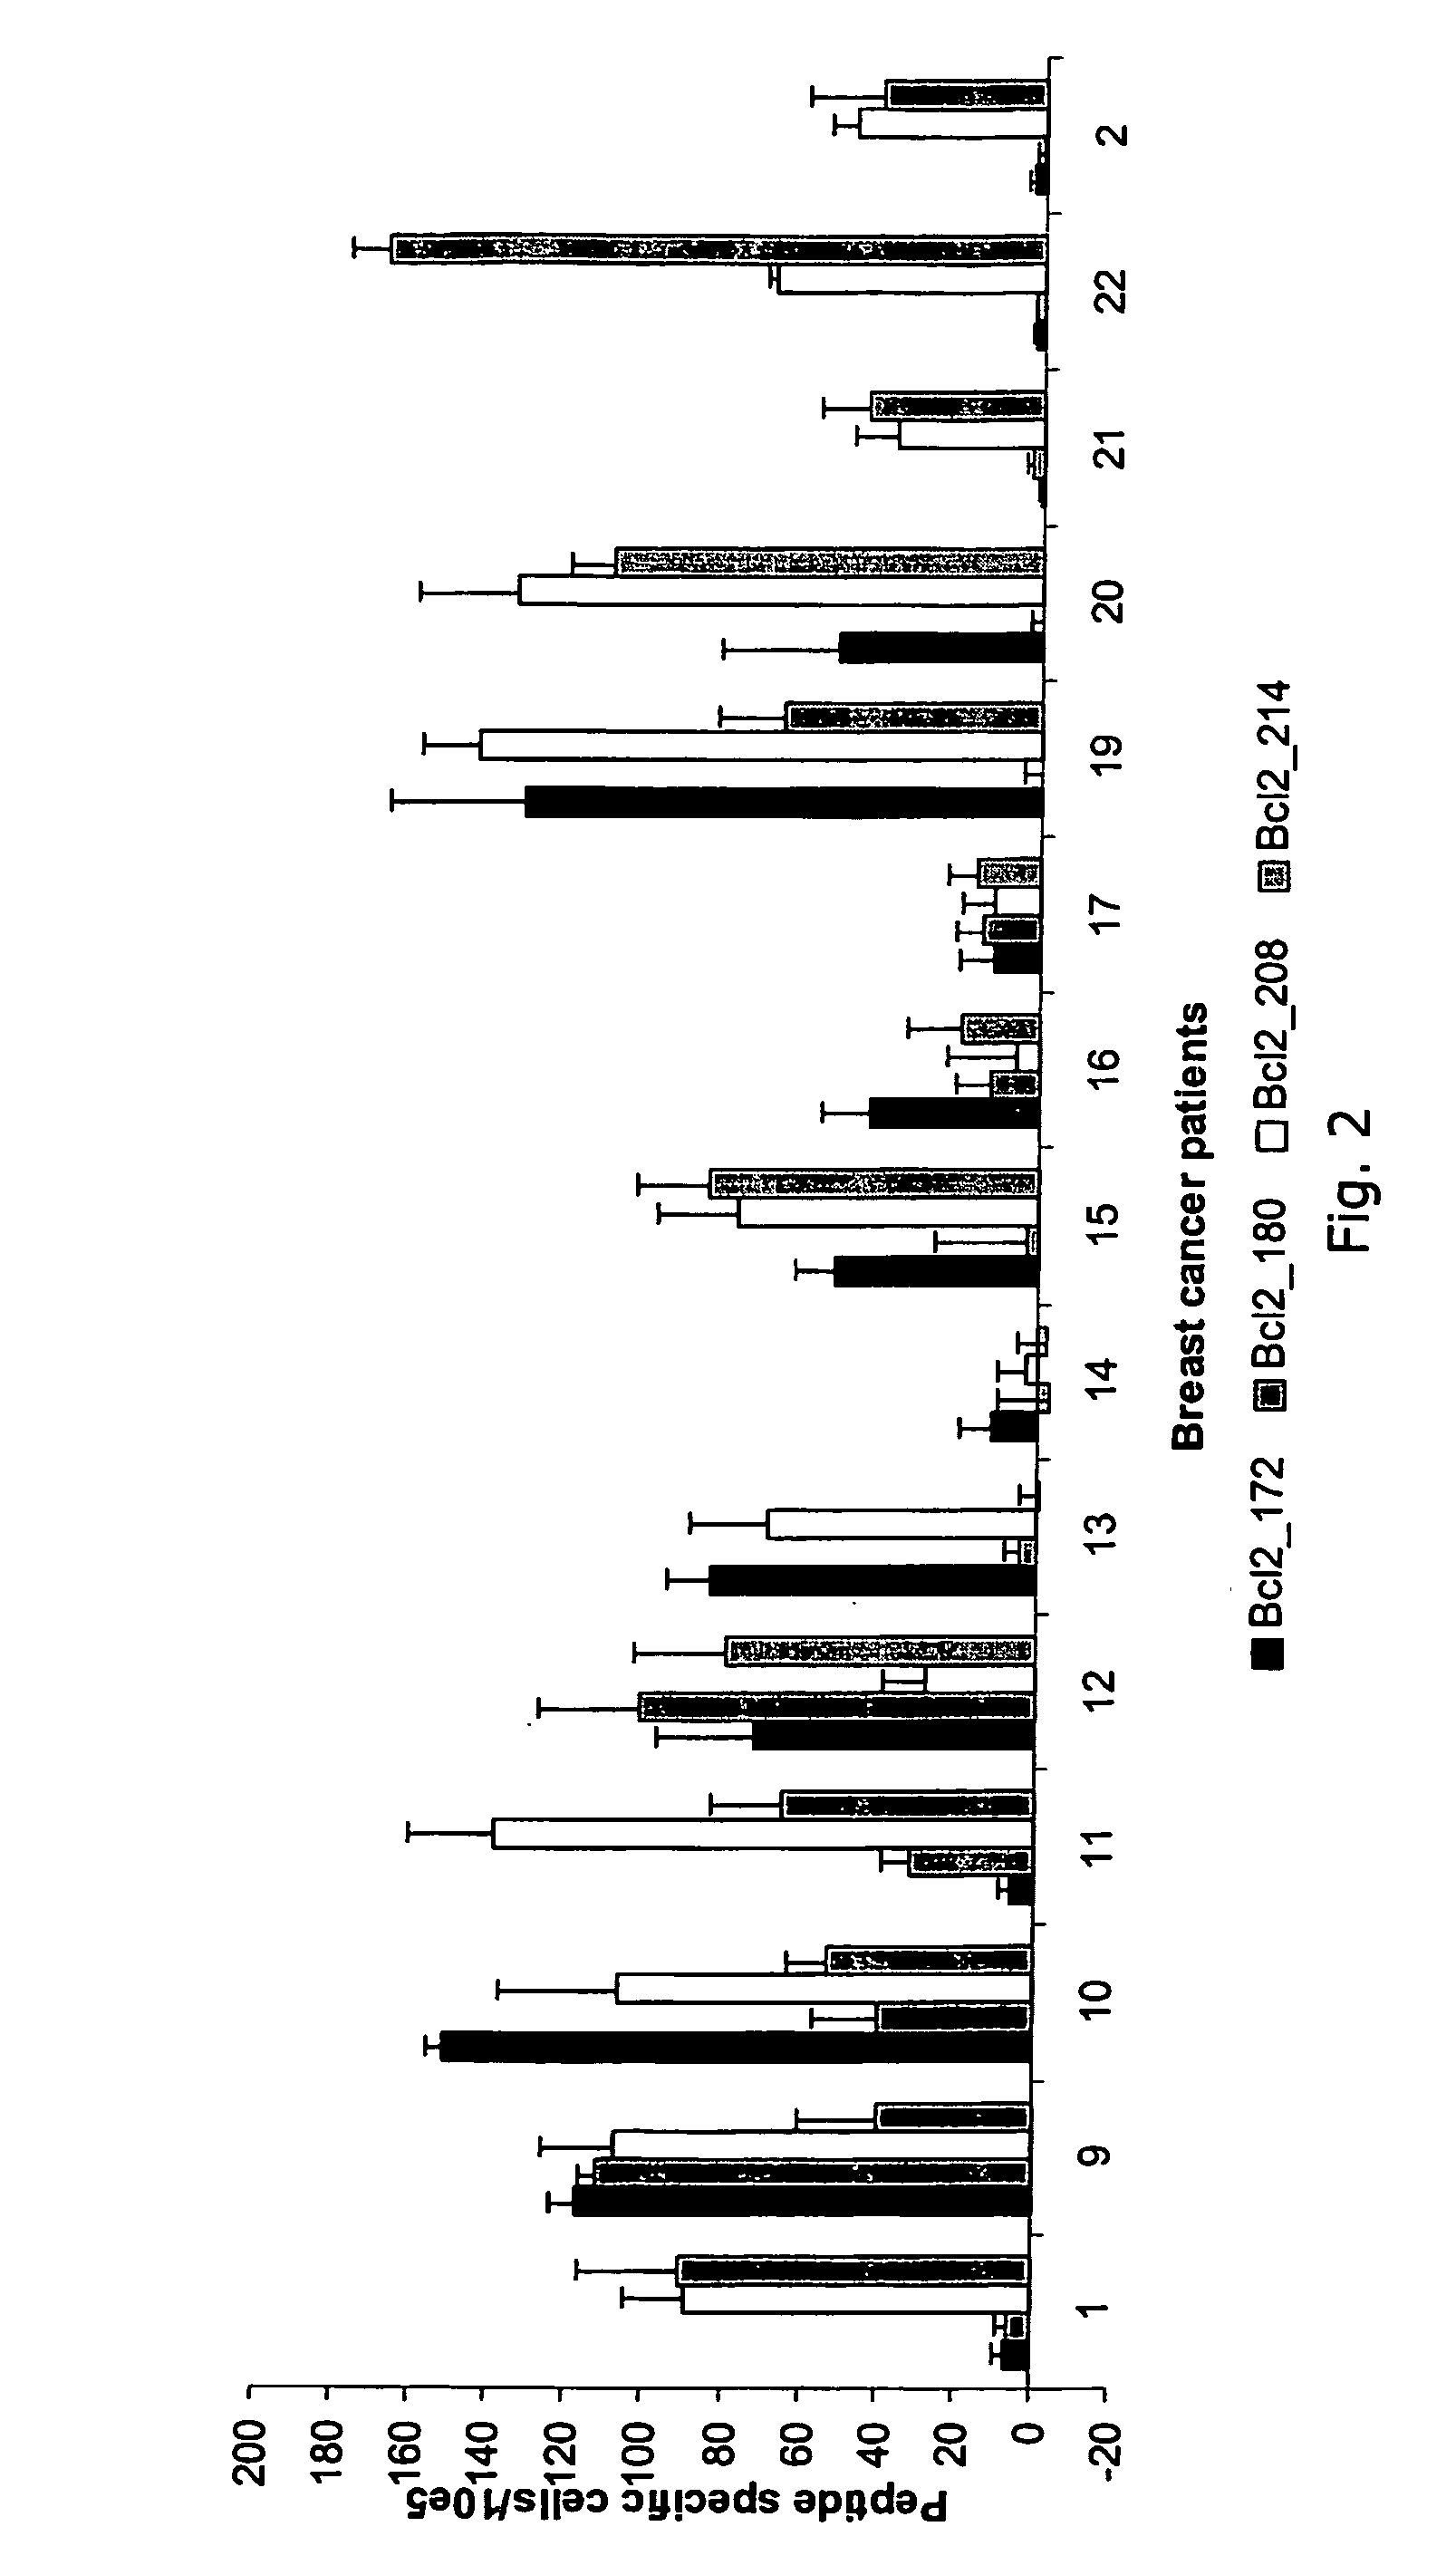 Proteins belonging to the Bcl-2 family and fragments thereof, and their use in cancer patients